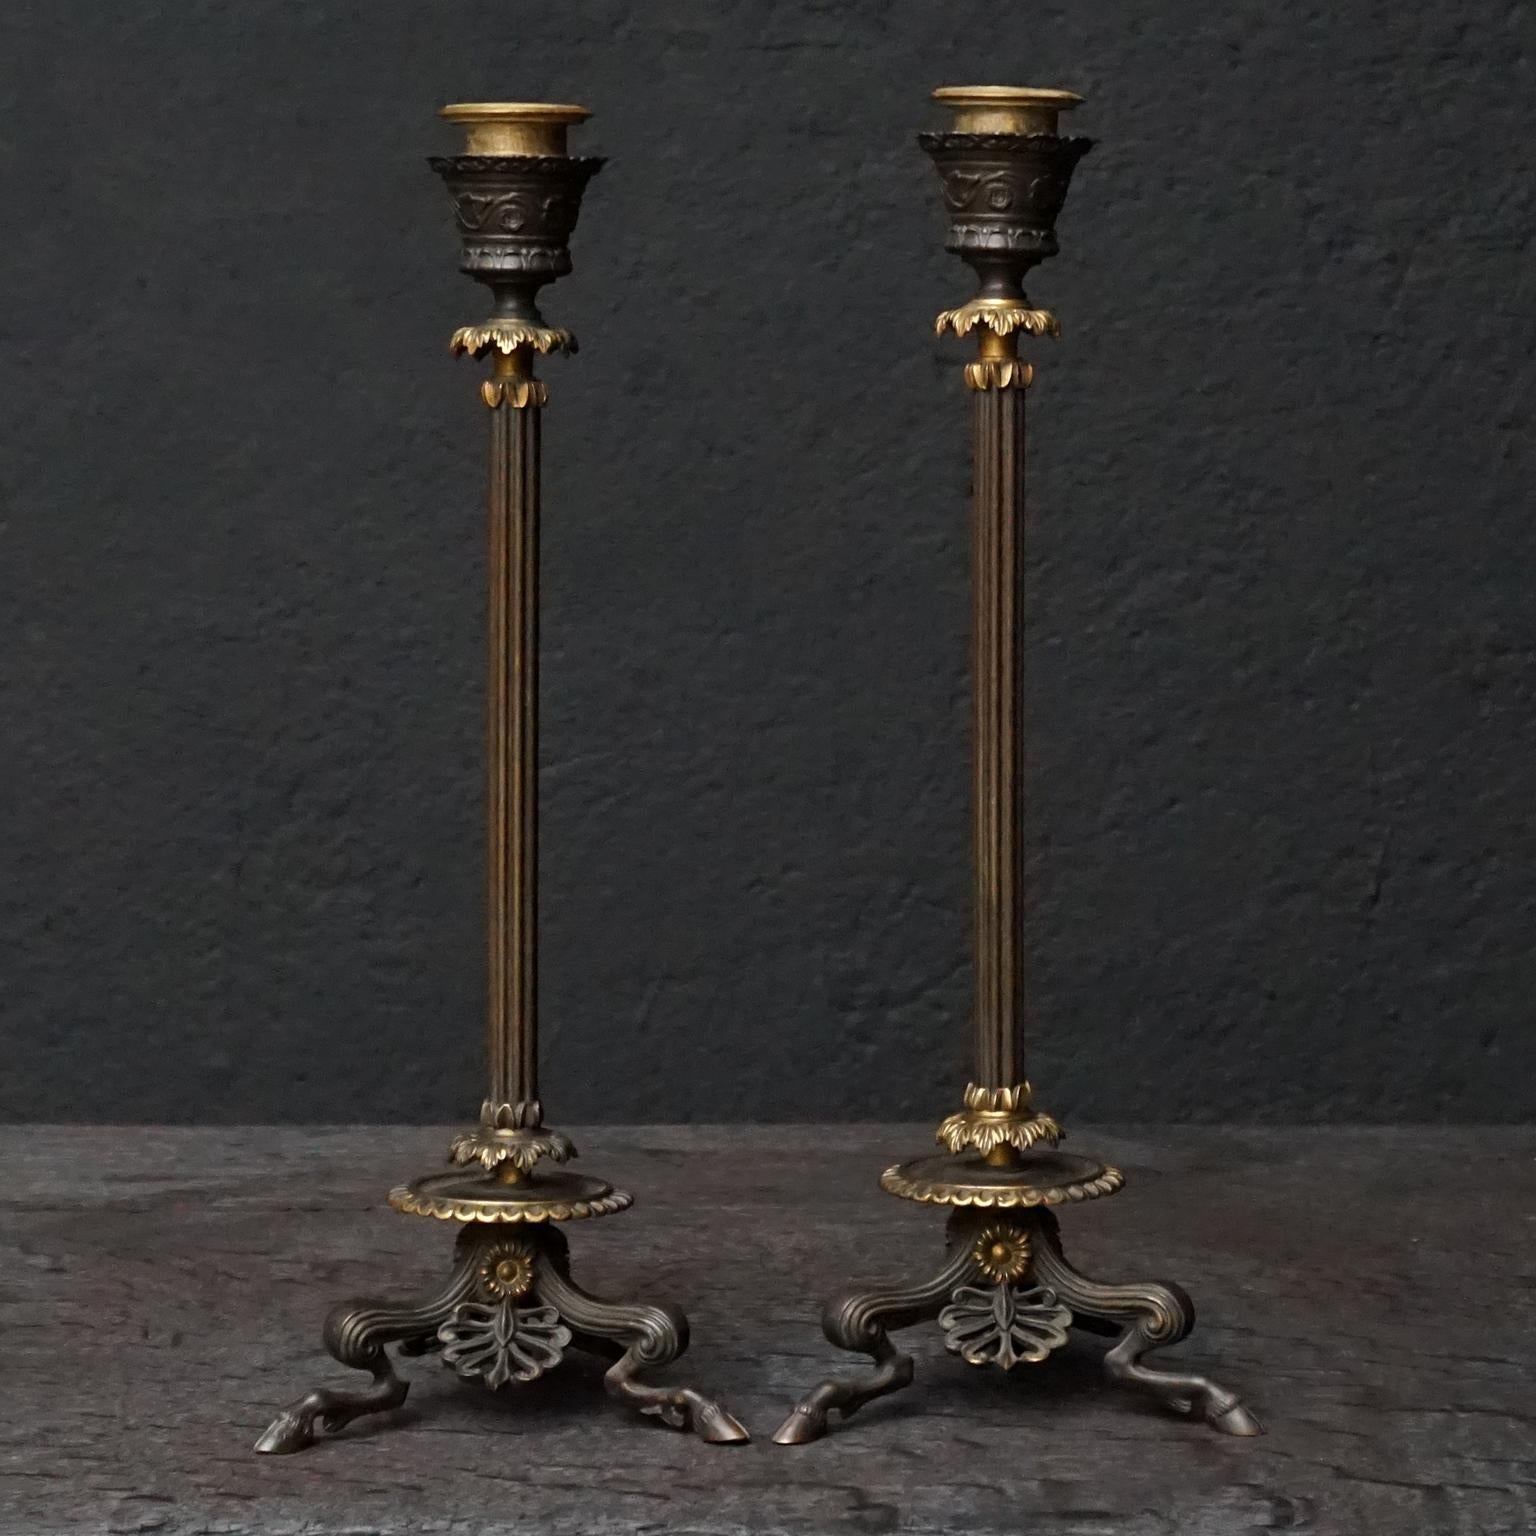 Two 19th century French partially ormolu bronze candlesticks on cloven hoofed hocked faun legs and feet

Cast in bronze, adorned with floral and acanthus leaf motif. 
The candle inserts and floral decorations are fire gilt, ormolu.
As you can see